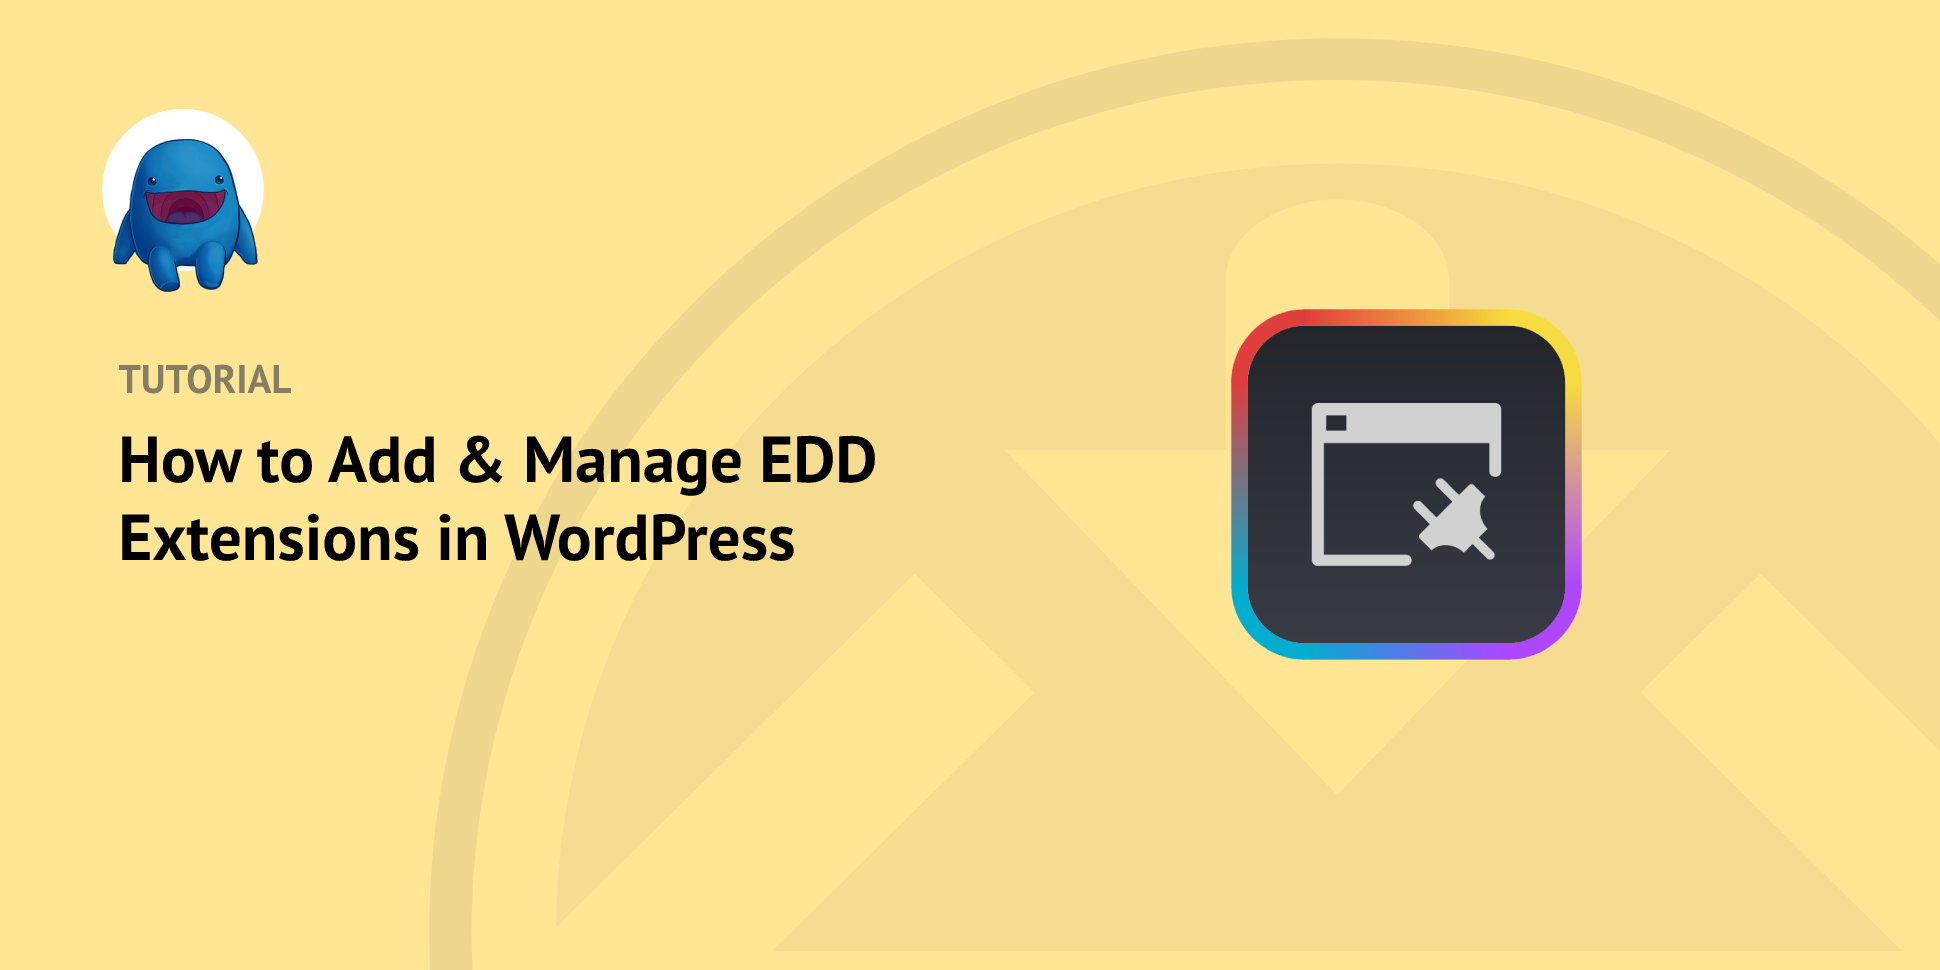 How to Add & Manage EDD Extensions in WordPress